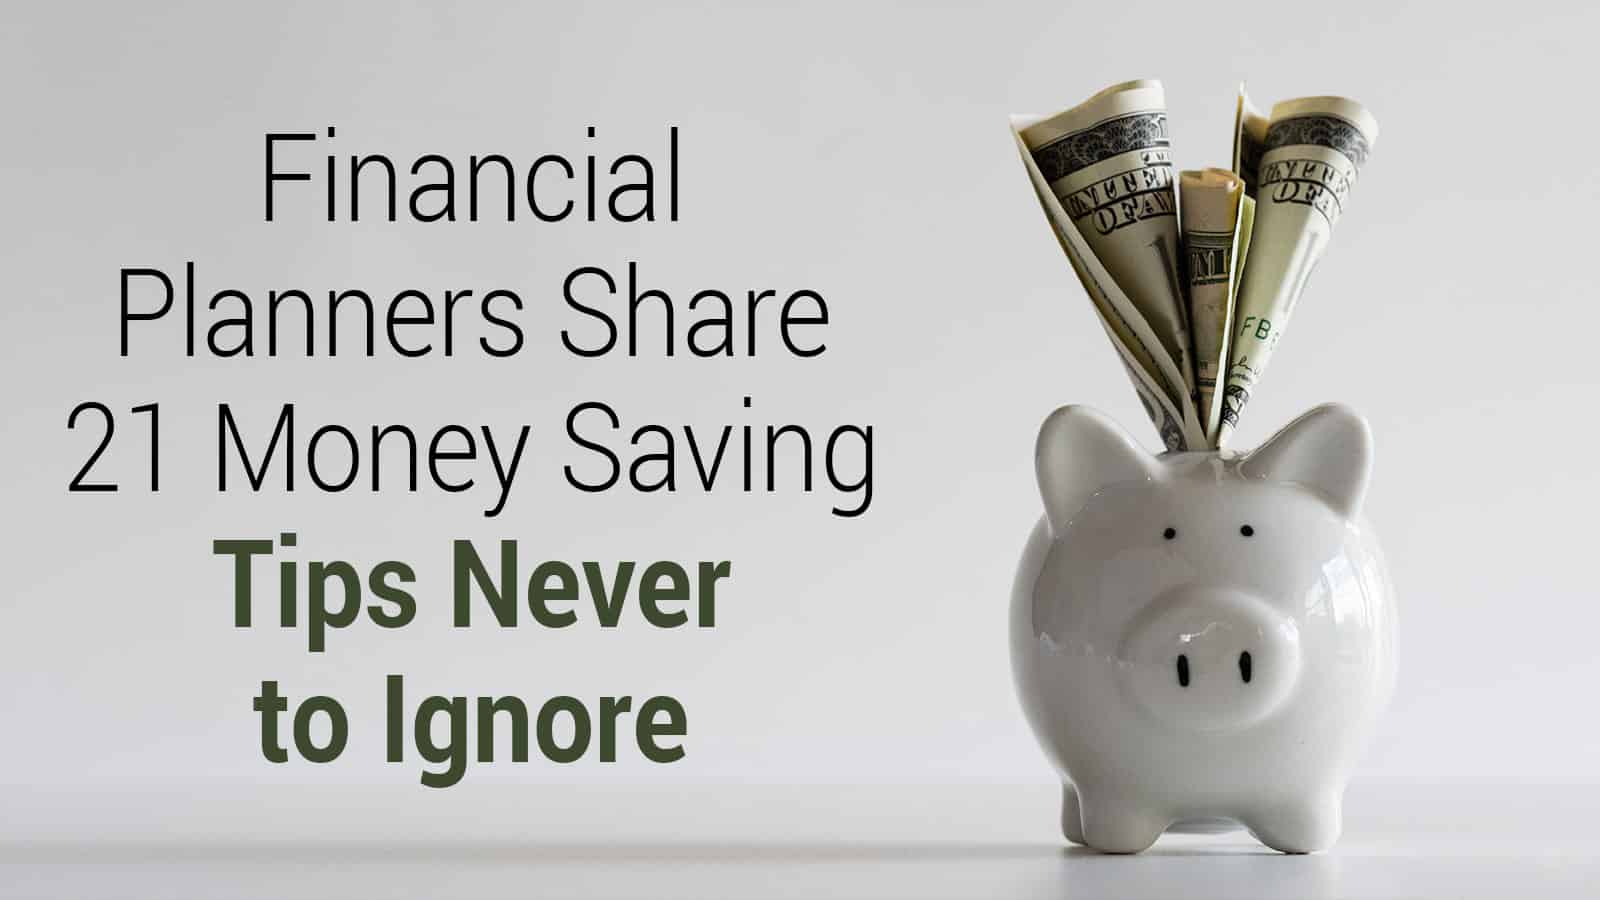 Financial Planners Share 21 Money Saving Tips Never to Ignore